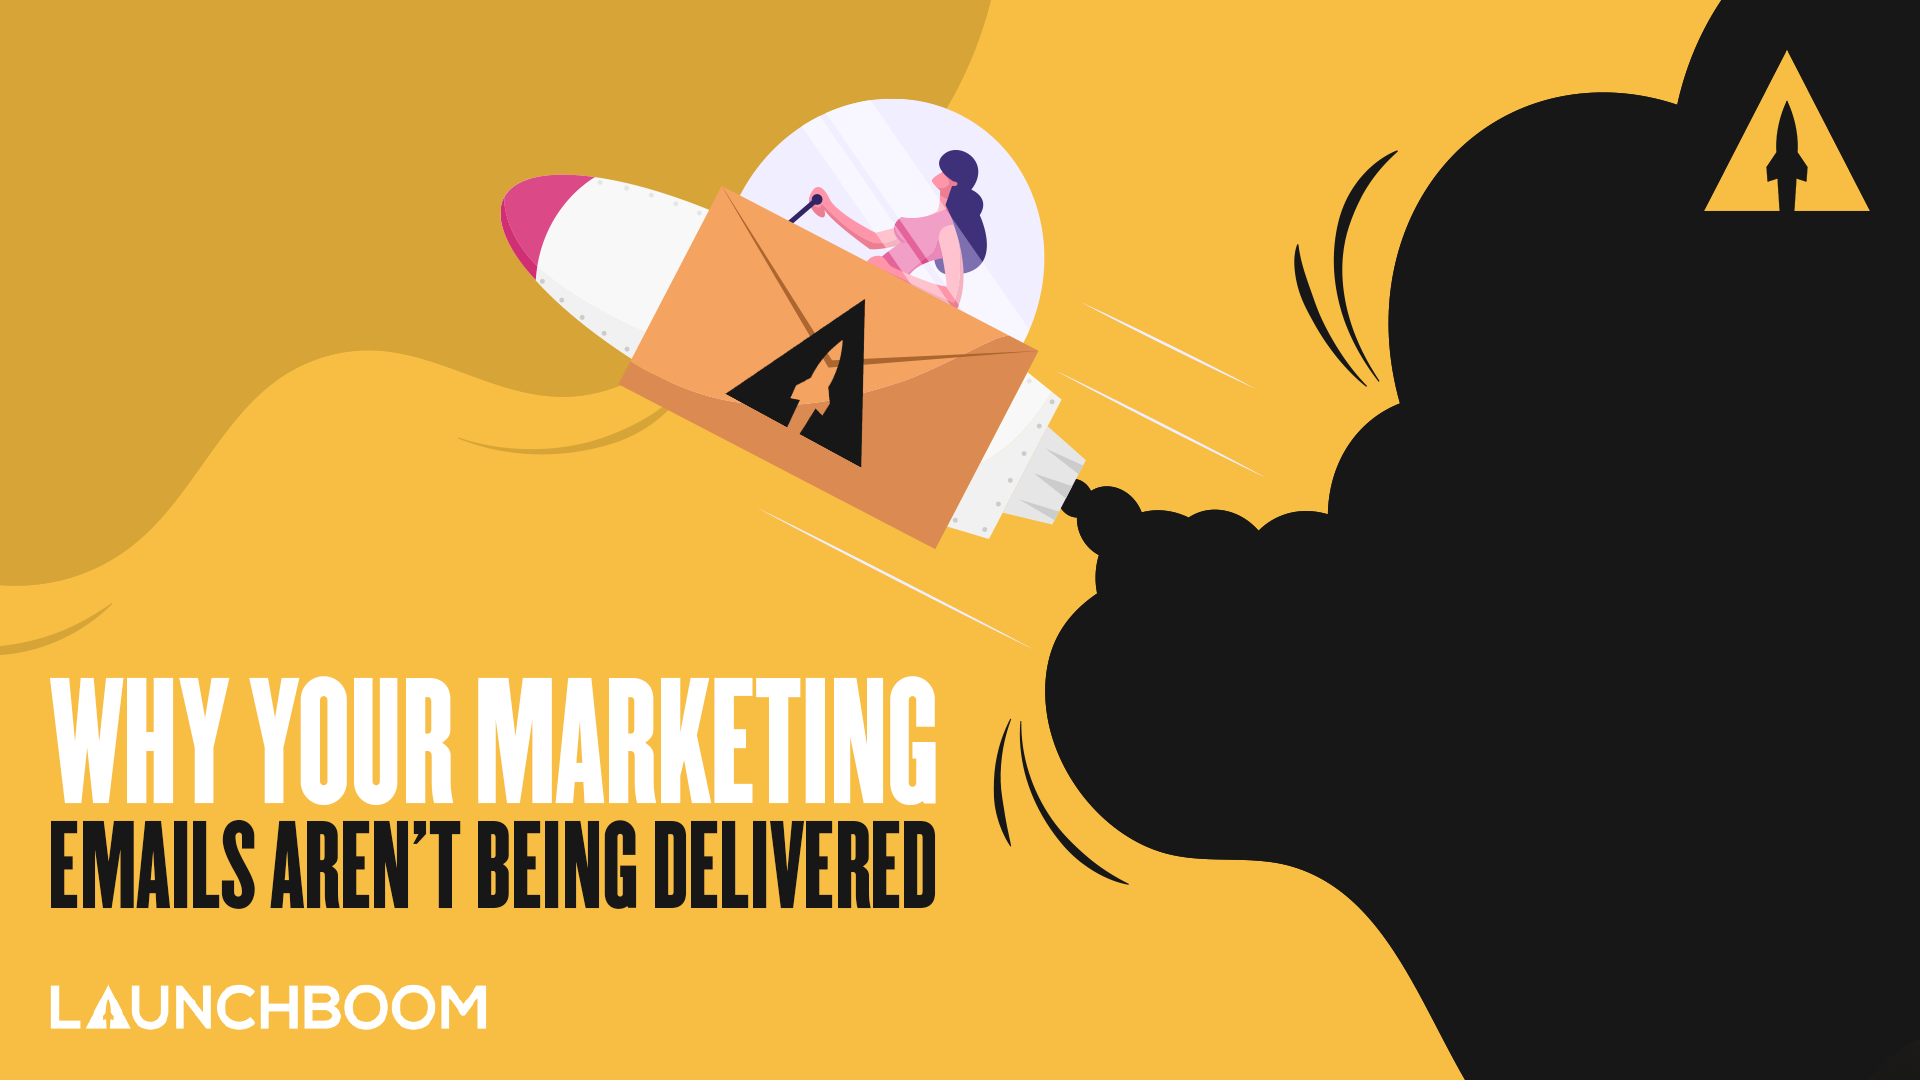 Why your marketing emails aren’t being delivered